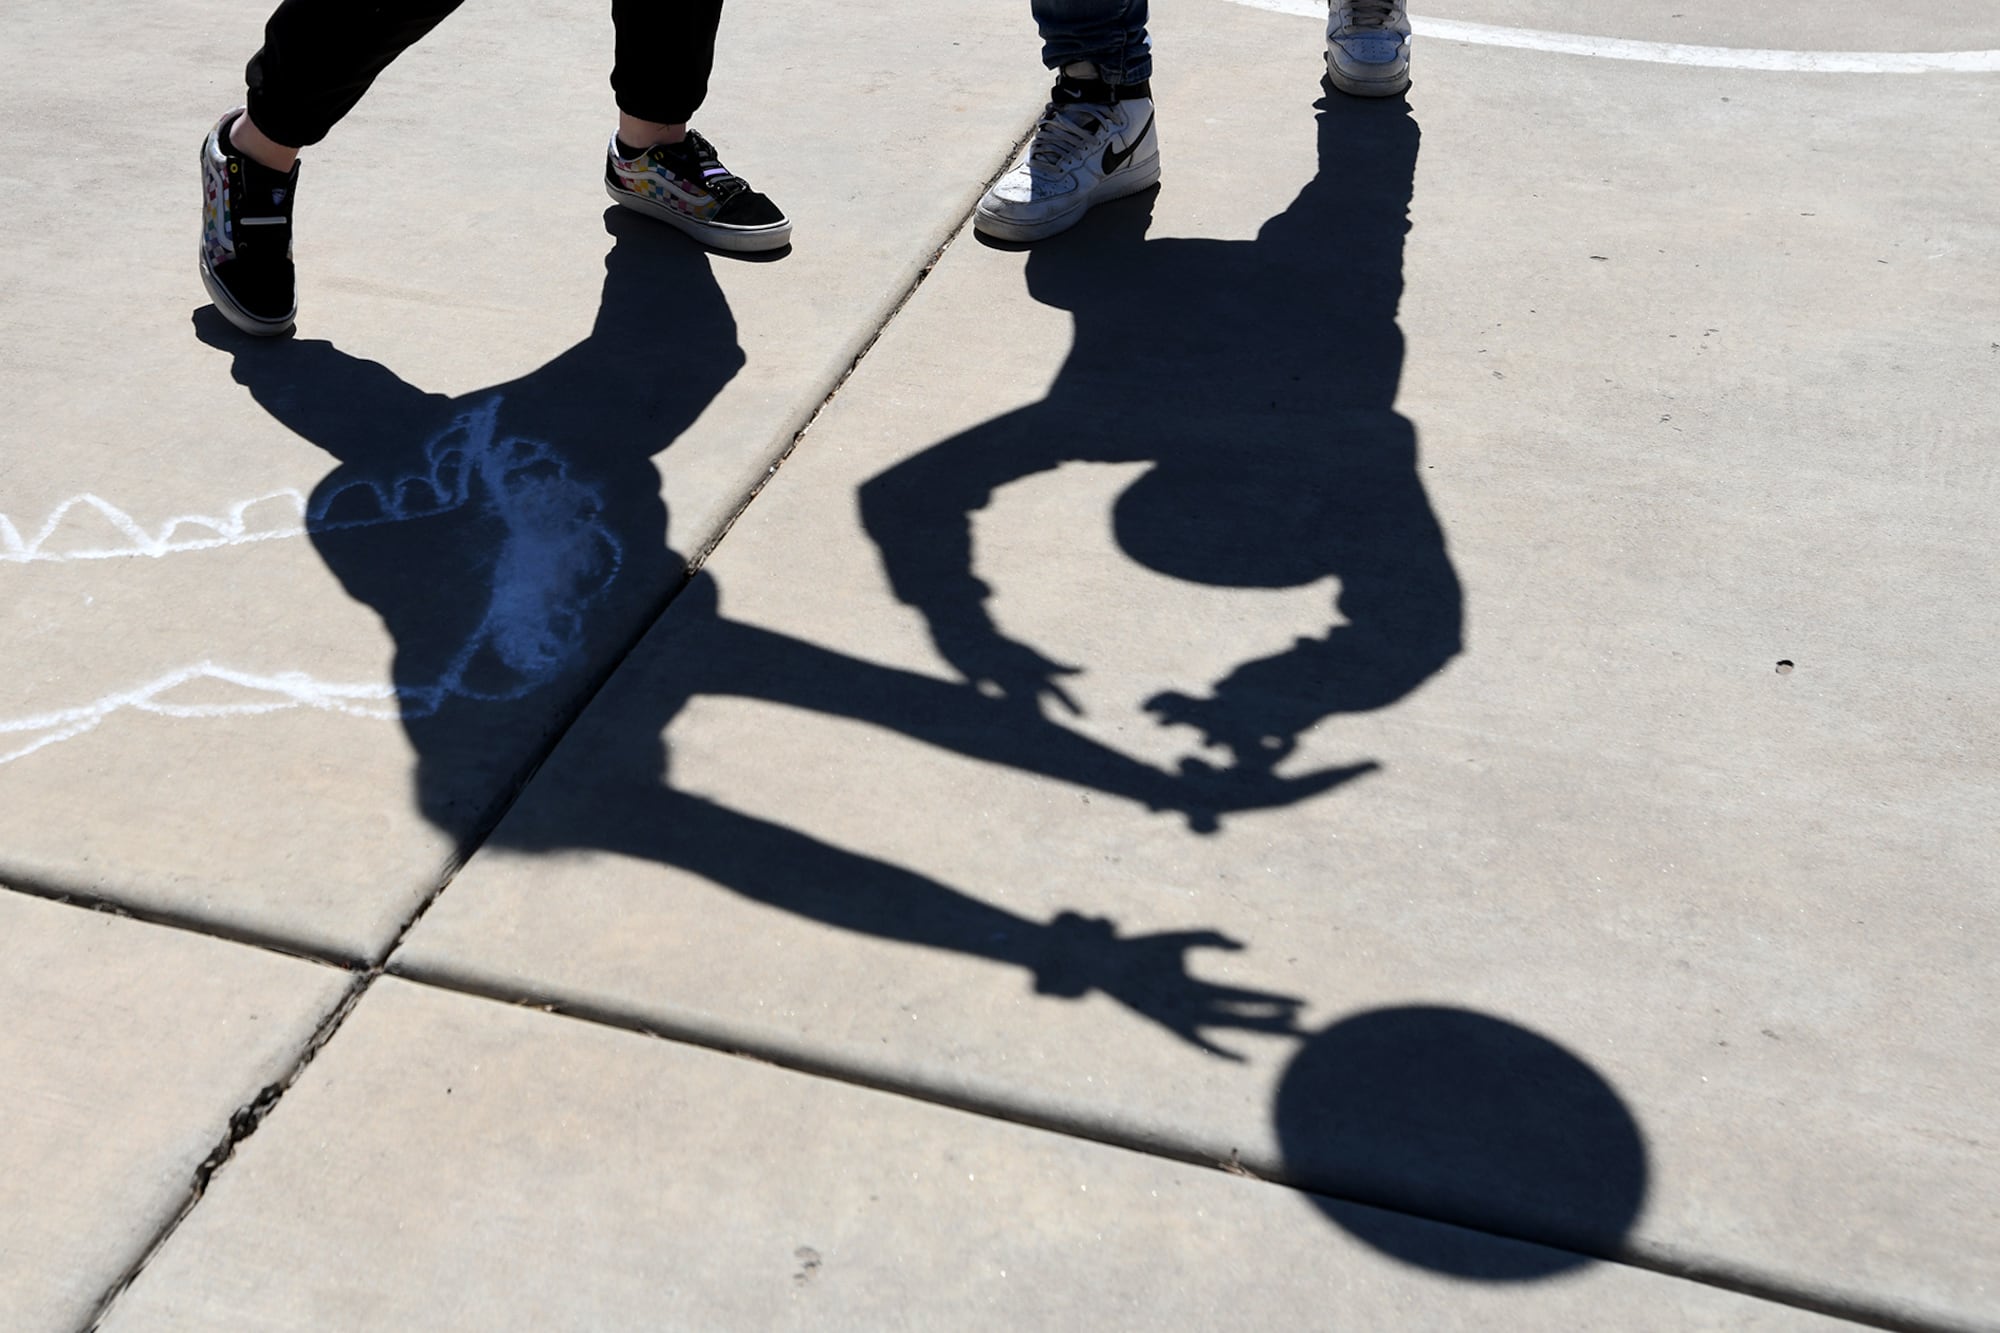 The shadows of children playing can be seen on the blacktop.